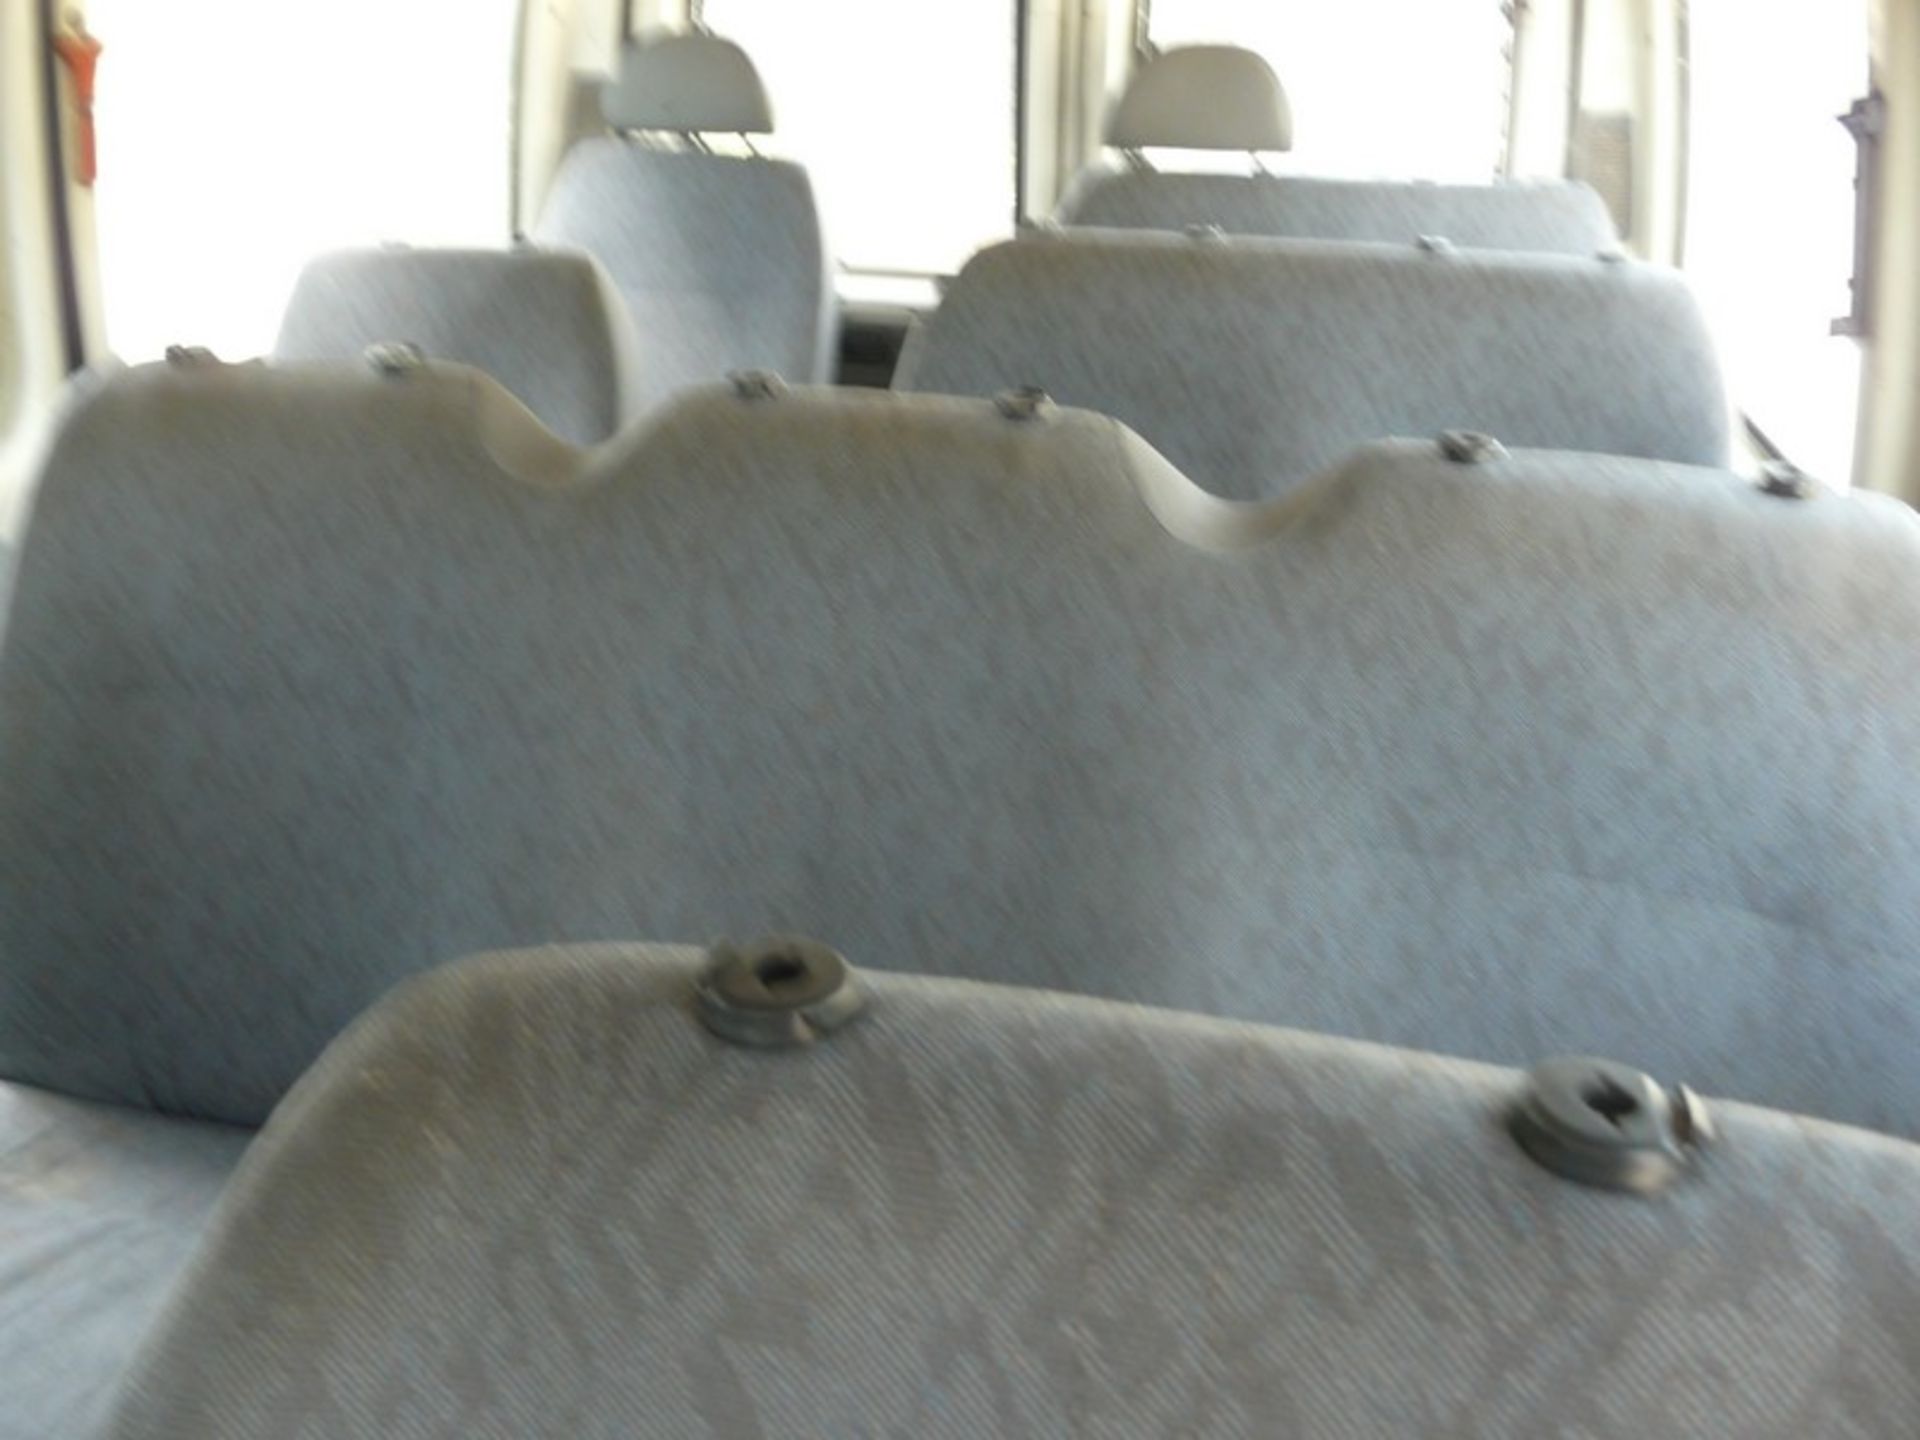 FORD TRANSIT, buss115, diesel, KM 146159, 11 seats, REG NEE 7504, Year: 1997 (Located in Greece - - Image 7 of 9